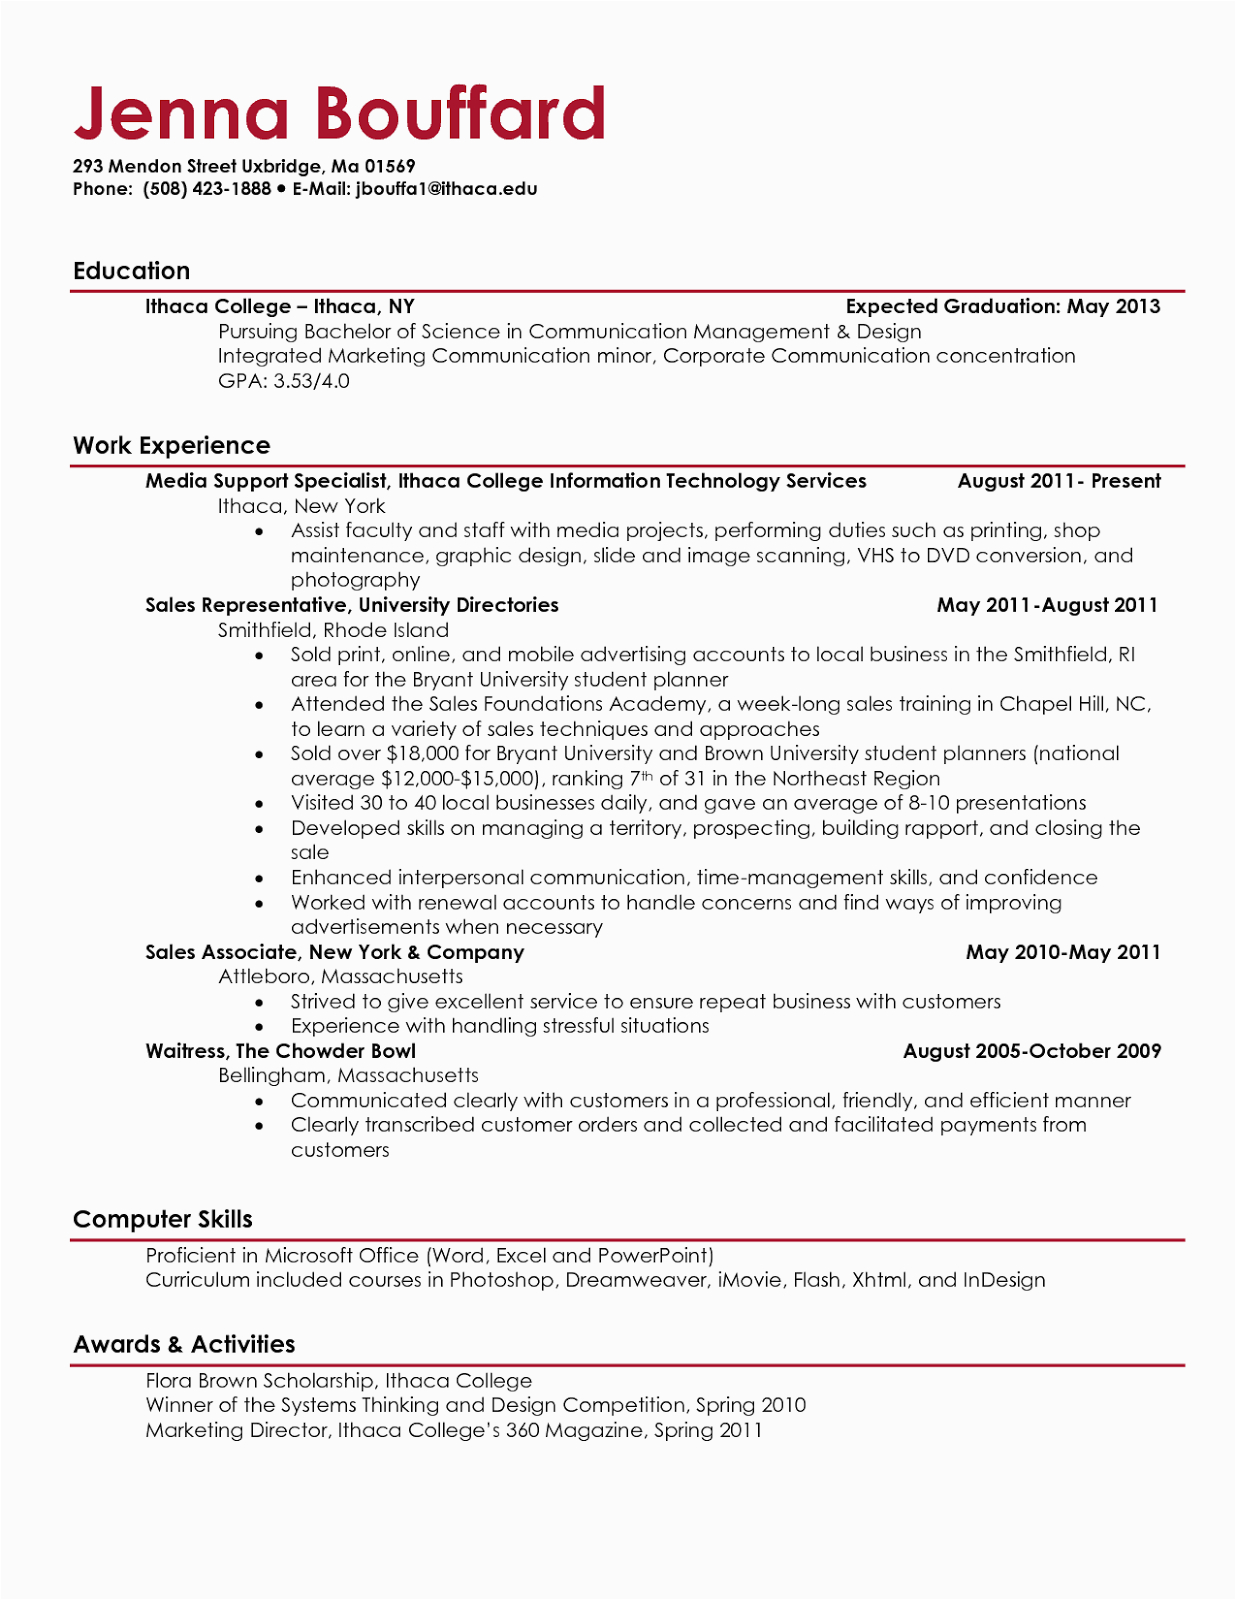 Sample Resume Samples for College Students Samples Of Resumes for College Students